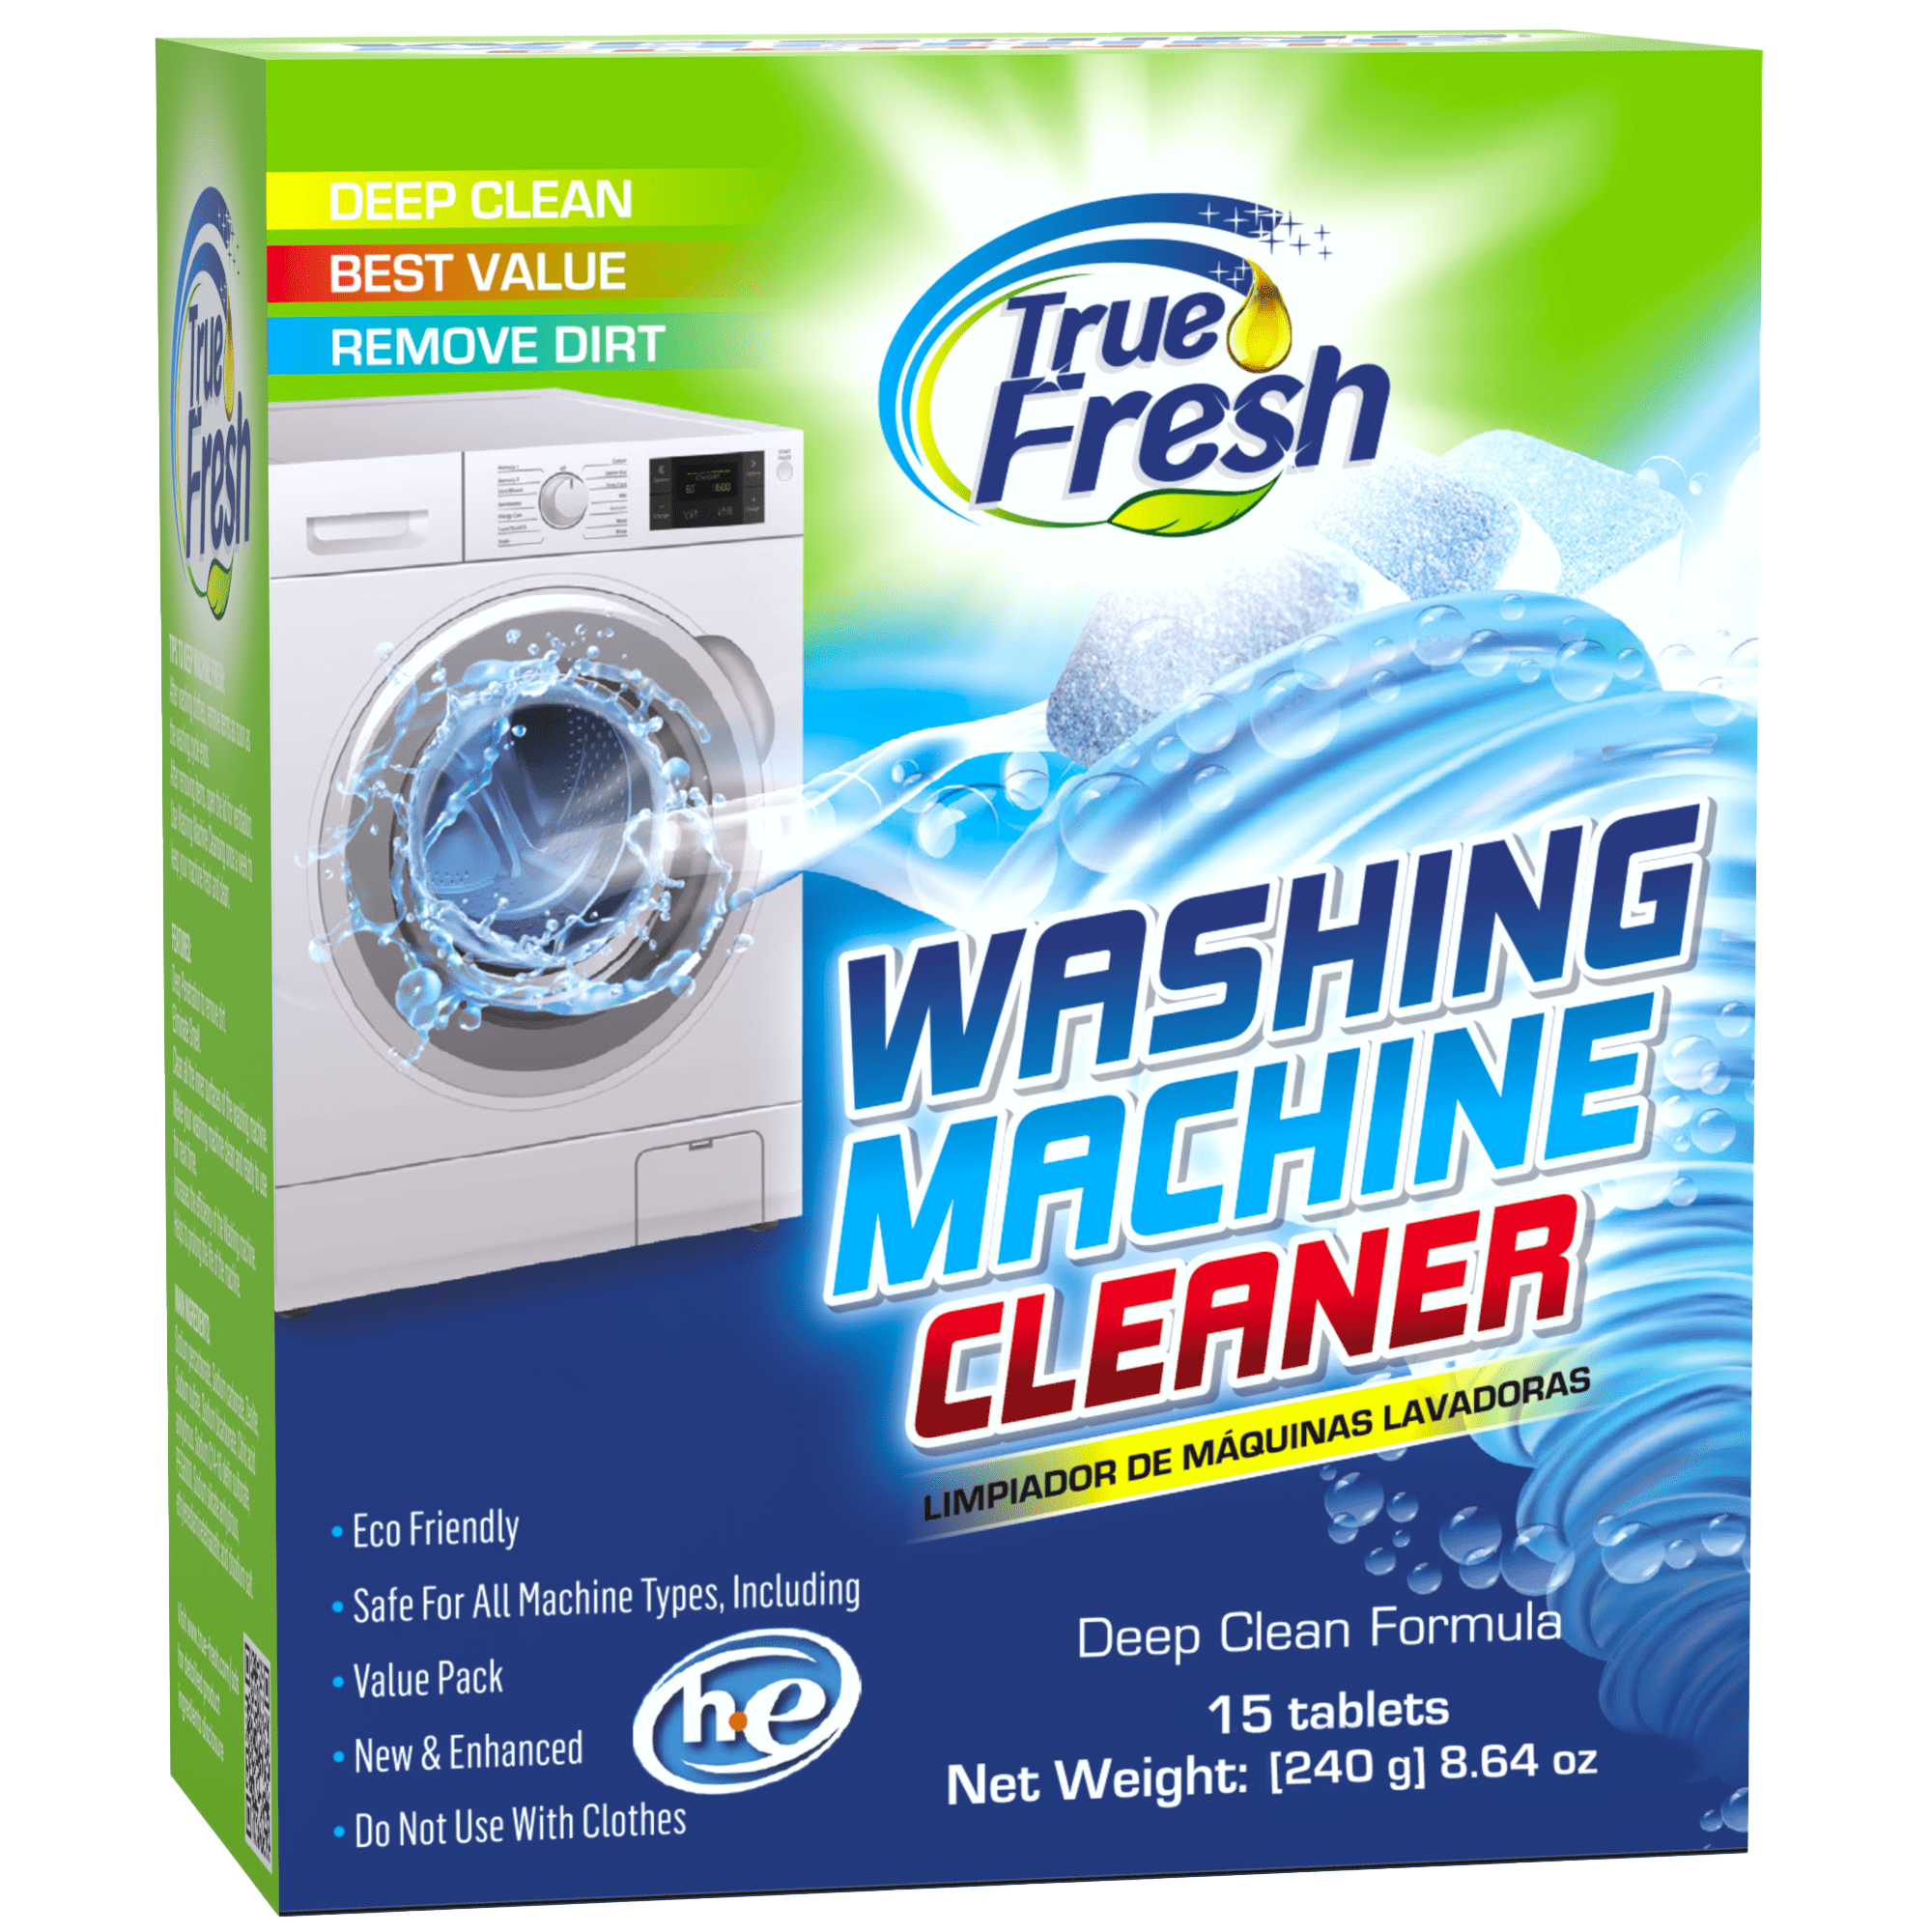 True Fresh Washing Machine Cleaner Tablets 15 Pack - Washer Cleaner -  Finally Clean All Wash Machines Including HE Front Loader Top Load